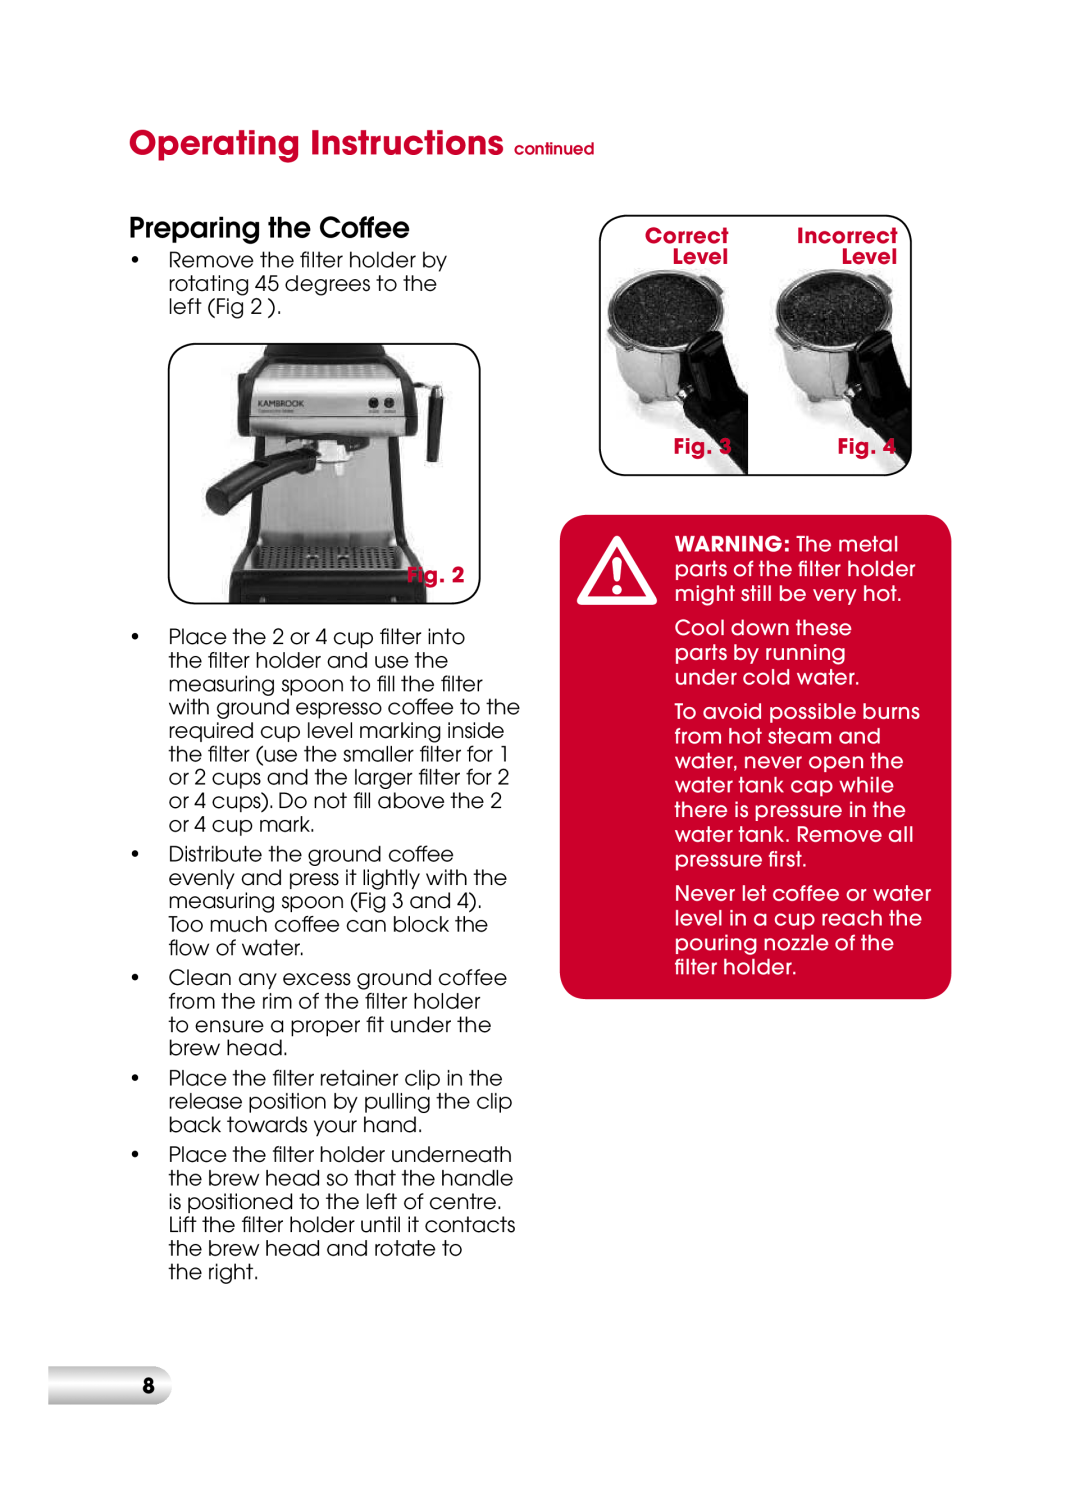 Kambrook KES110 manual Operating Instructions continued, Preparing the Coffee, Correct Incorrect Level Level 